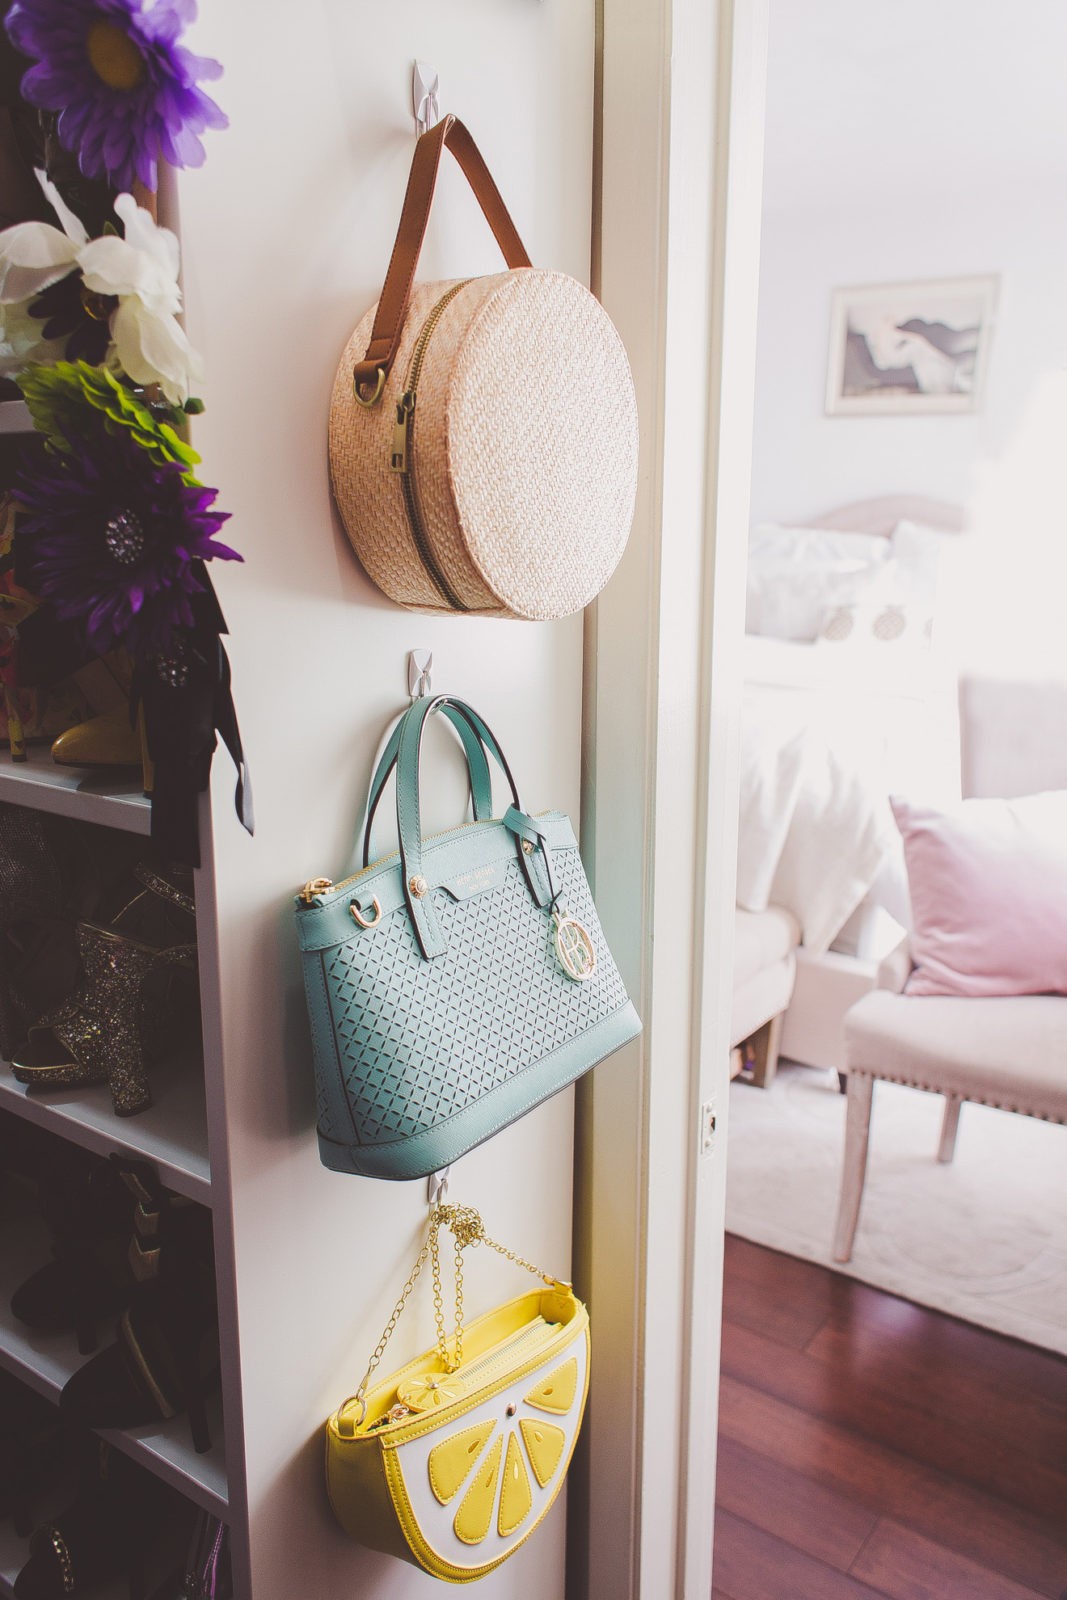 Quick Tips for Tidying Up Your Home,closet organization by Los Angeles Lifestyle Blogger Laura Lily | Tips on Tidying Up Your Home and Shopping Less by popular Los Angeles life and style blogger, Laura Lily: image of three purses hanging on hooks.